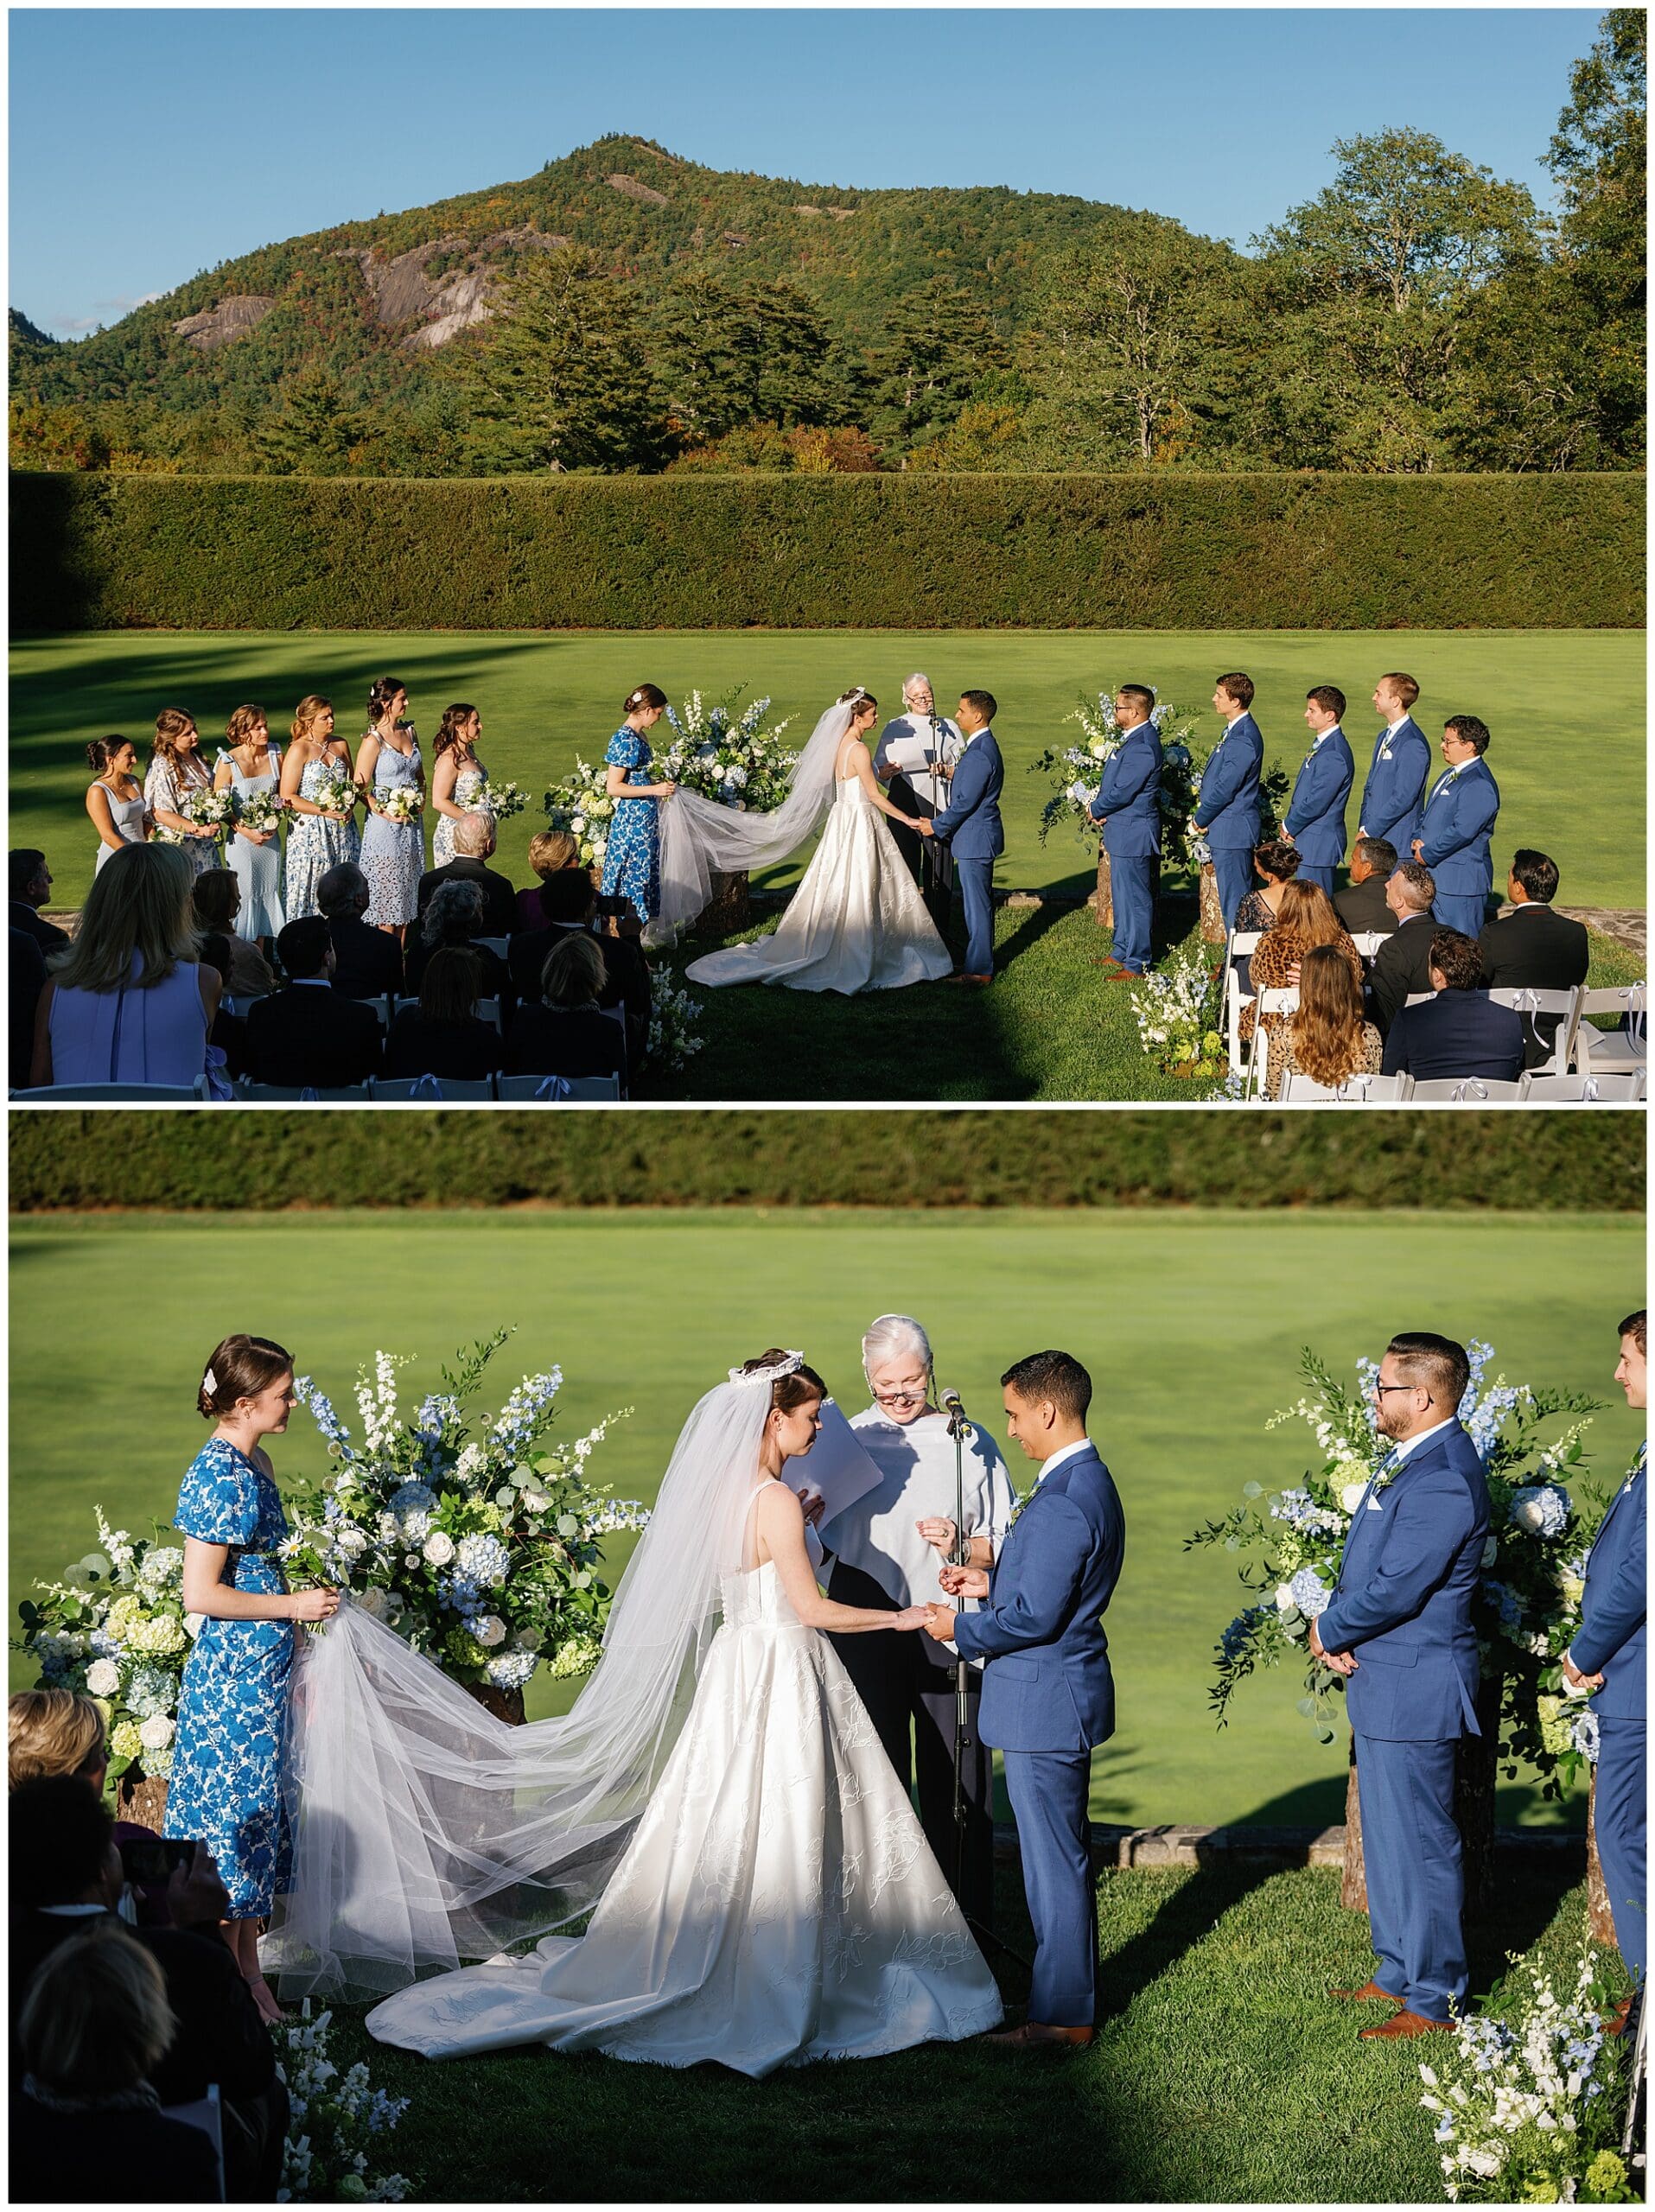 A wedding ceremony in a field with a mountain in the background.